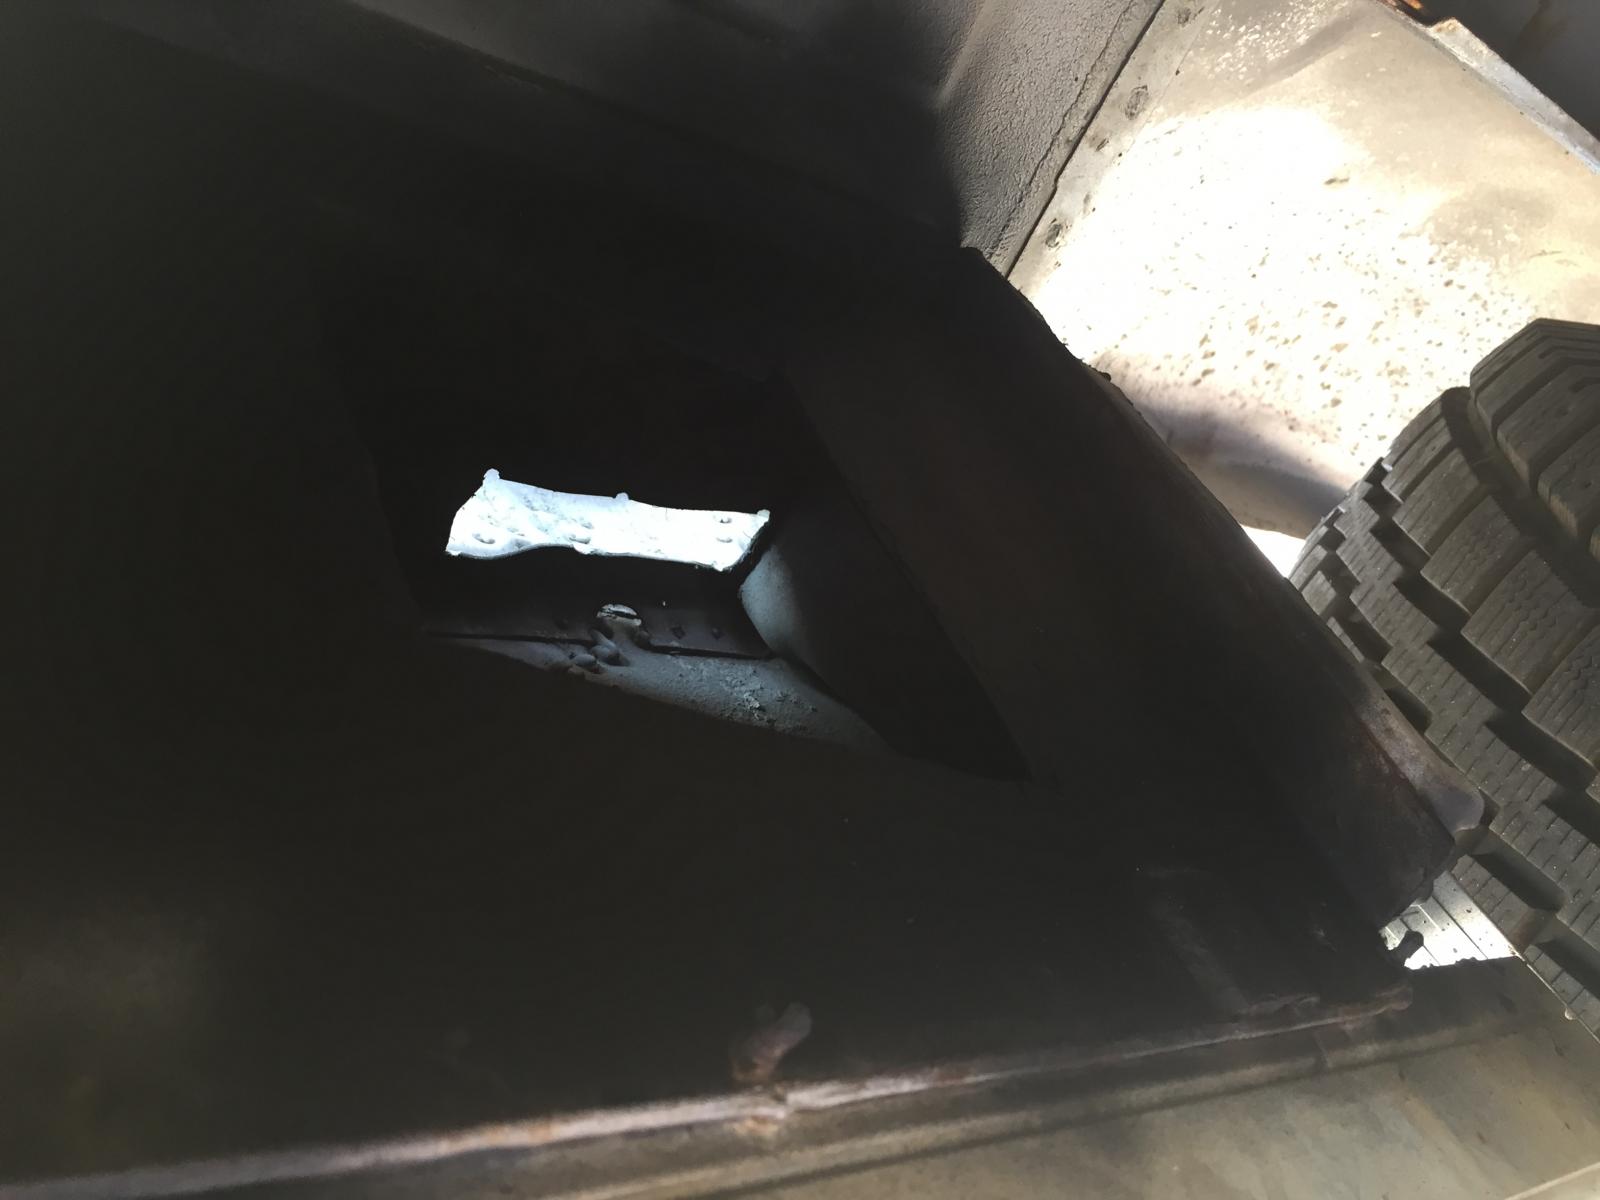 Hole in van floor where rear ac/heater hoses ran. The lights coming through the hole in the floor and this is looking at the second hole cut through wall of the underbody.